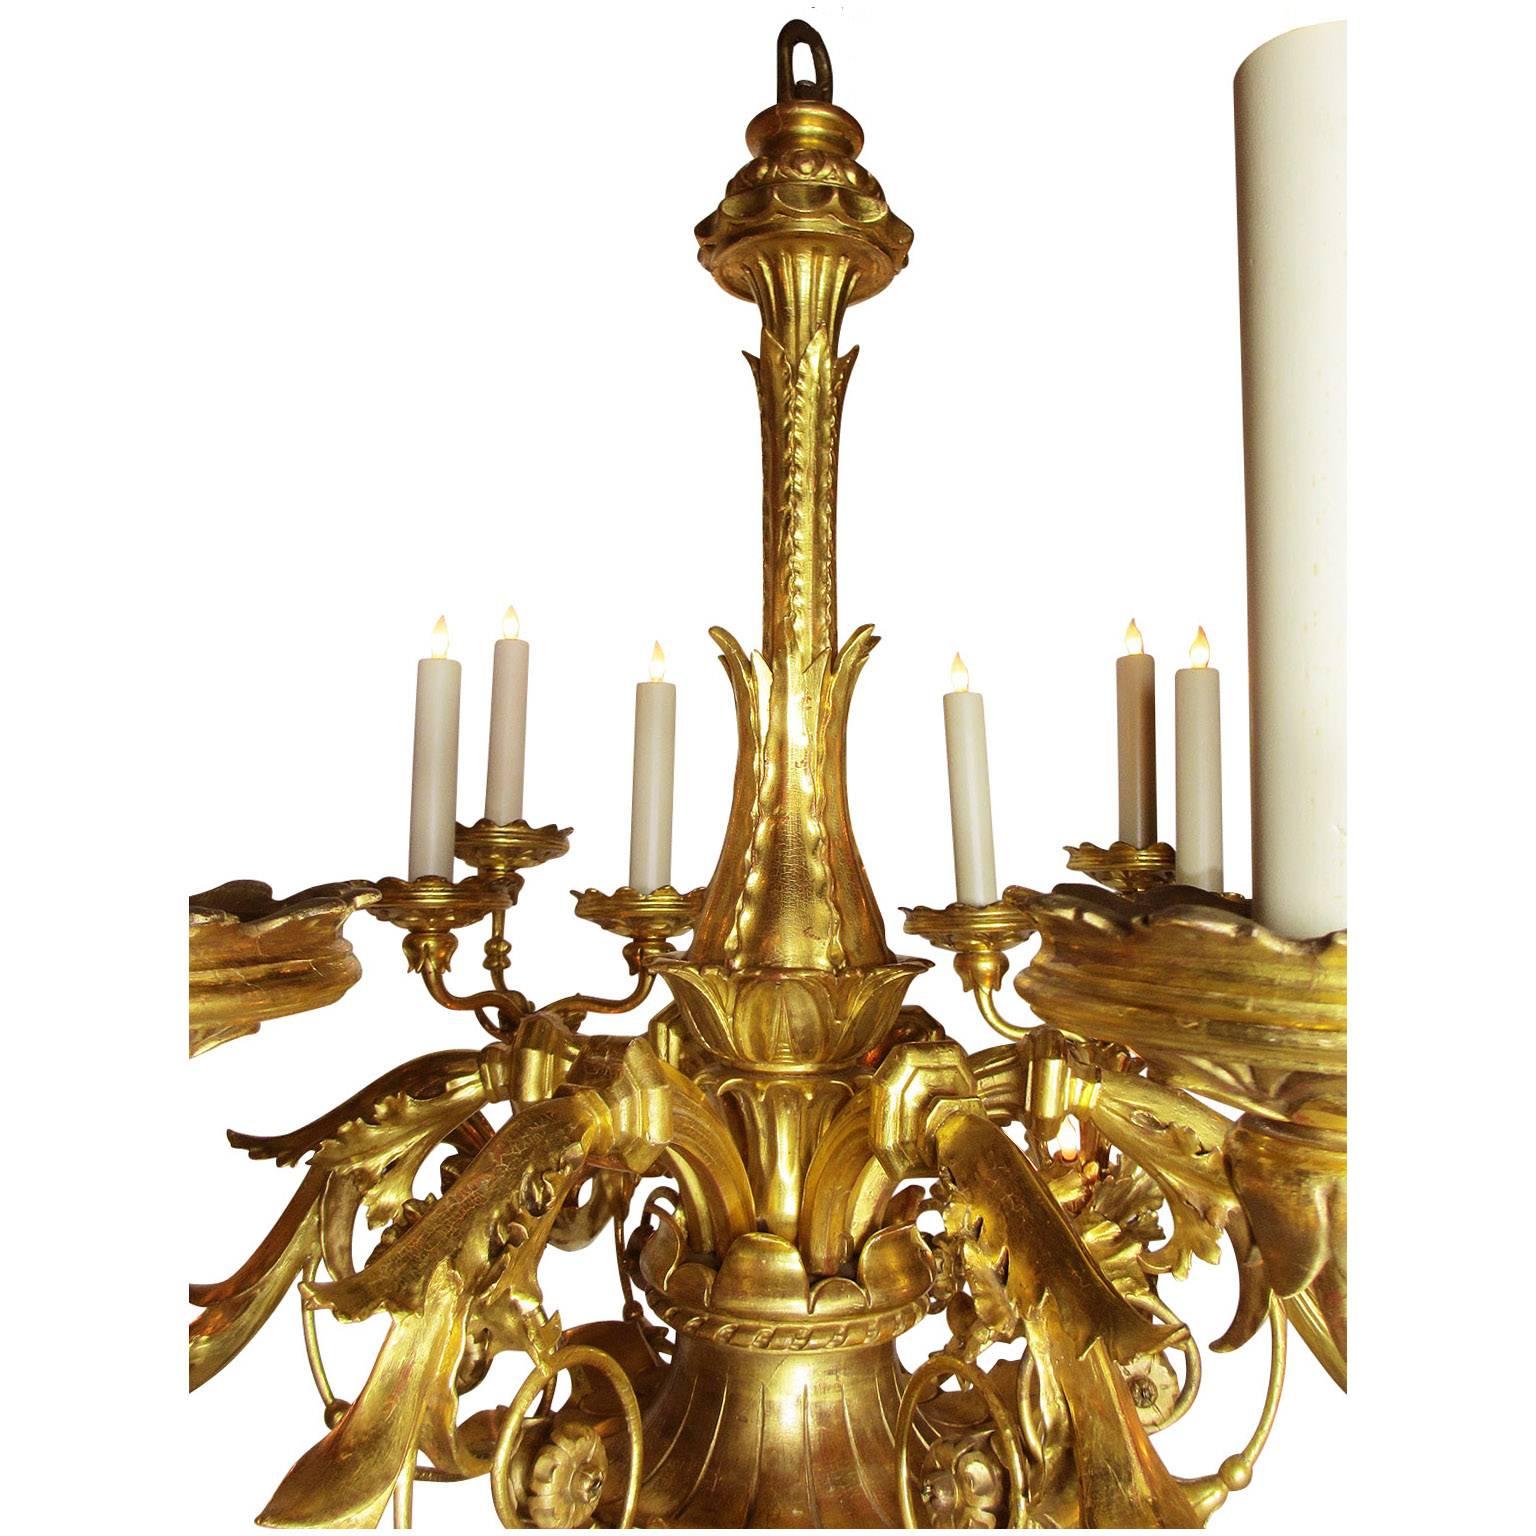 Palatial Italian 19th Century Florentine Rococo Giltwood Carved Chandelier For Sale 1